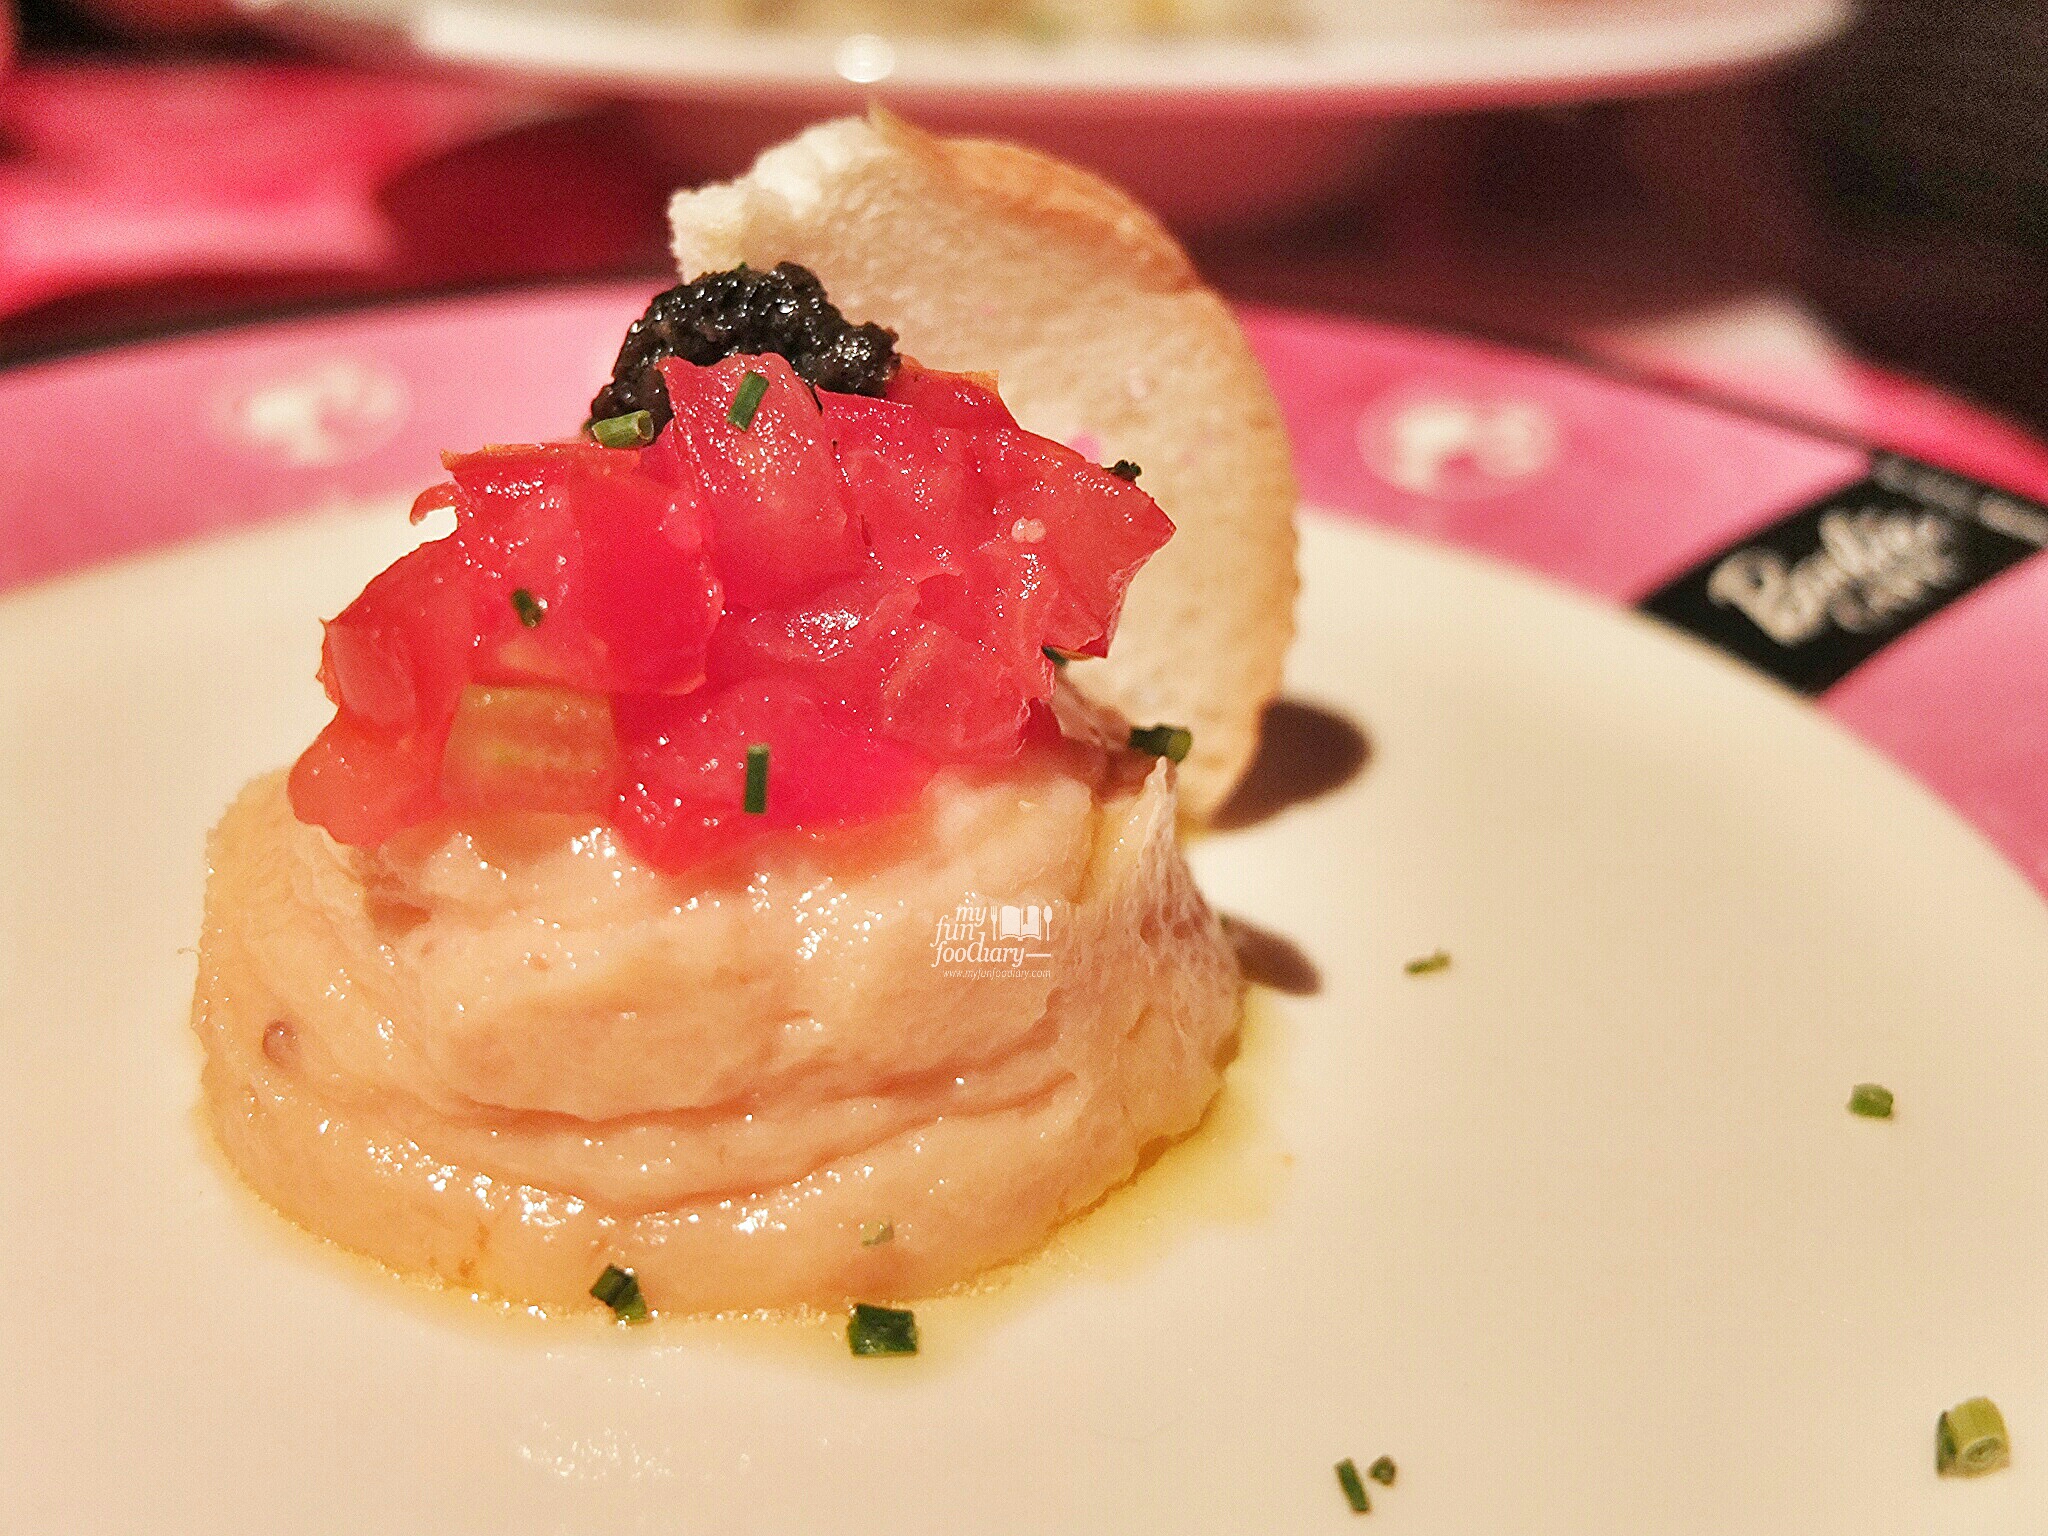 Truffle Salmon Mousse at Barbie Cafe Taiwan by Myfunfoodiary